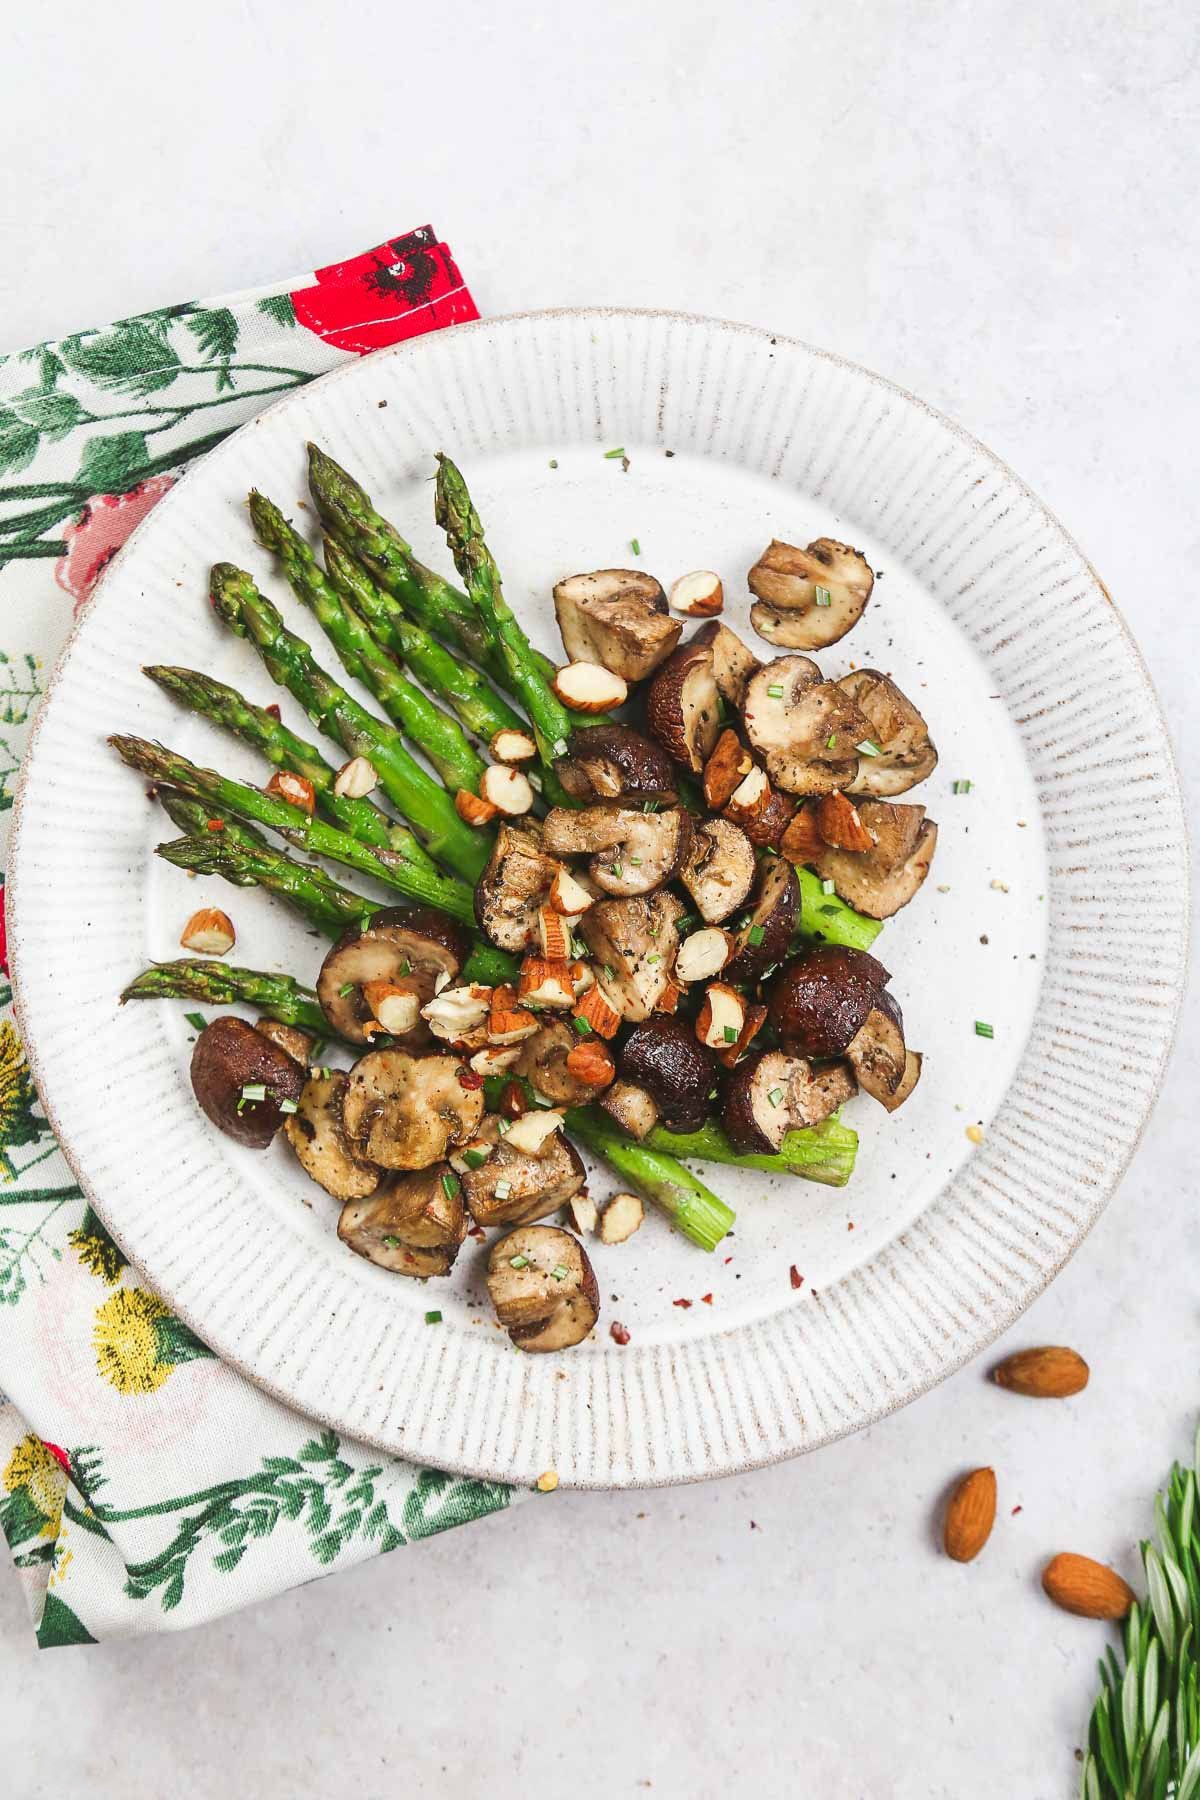 Crispy air fryer Asparagus and mushroom topped with crushed almonds served in a white plate; with a floral tea towel on the side.